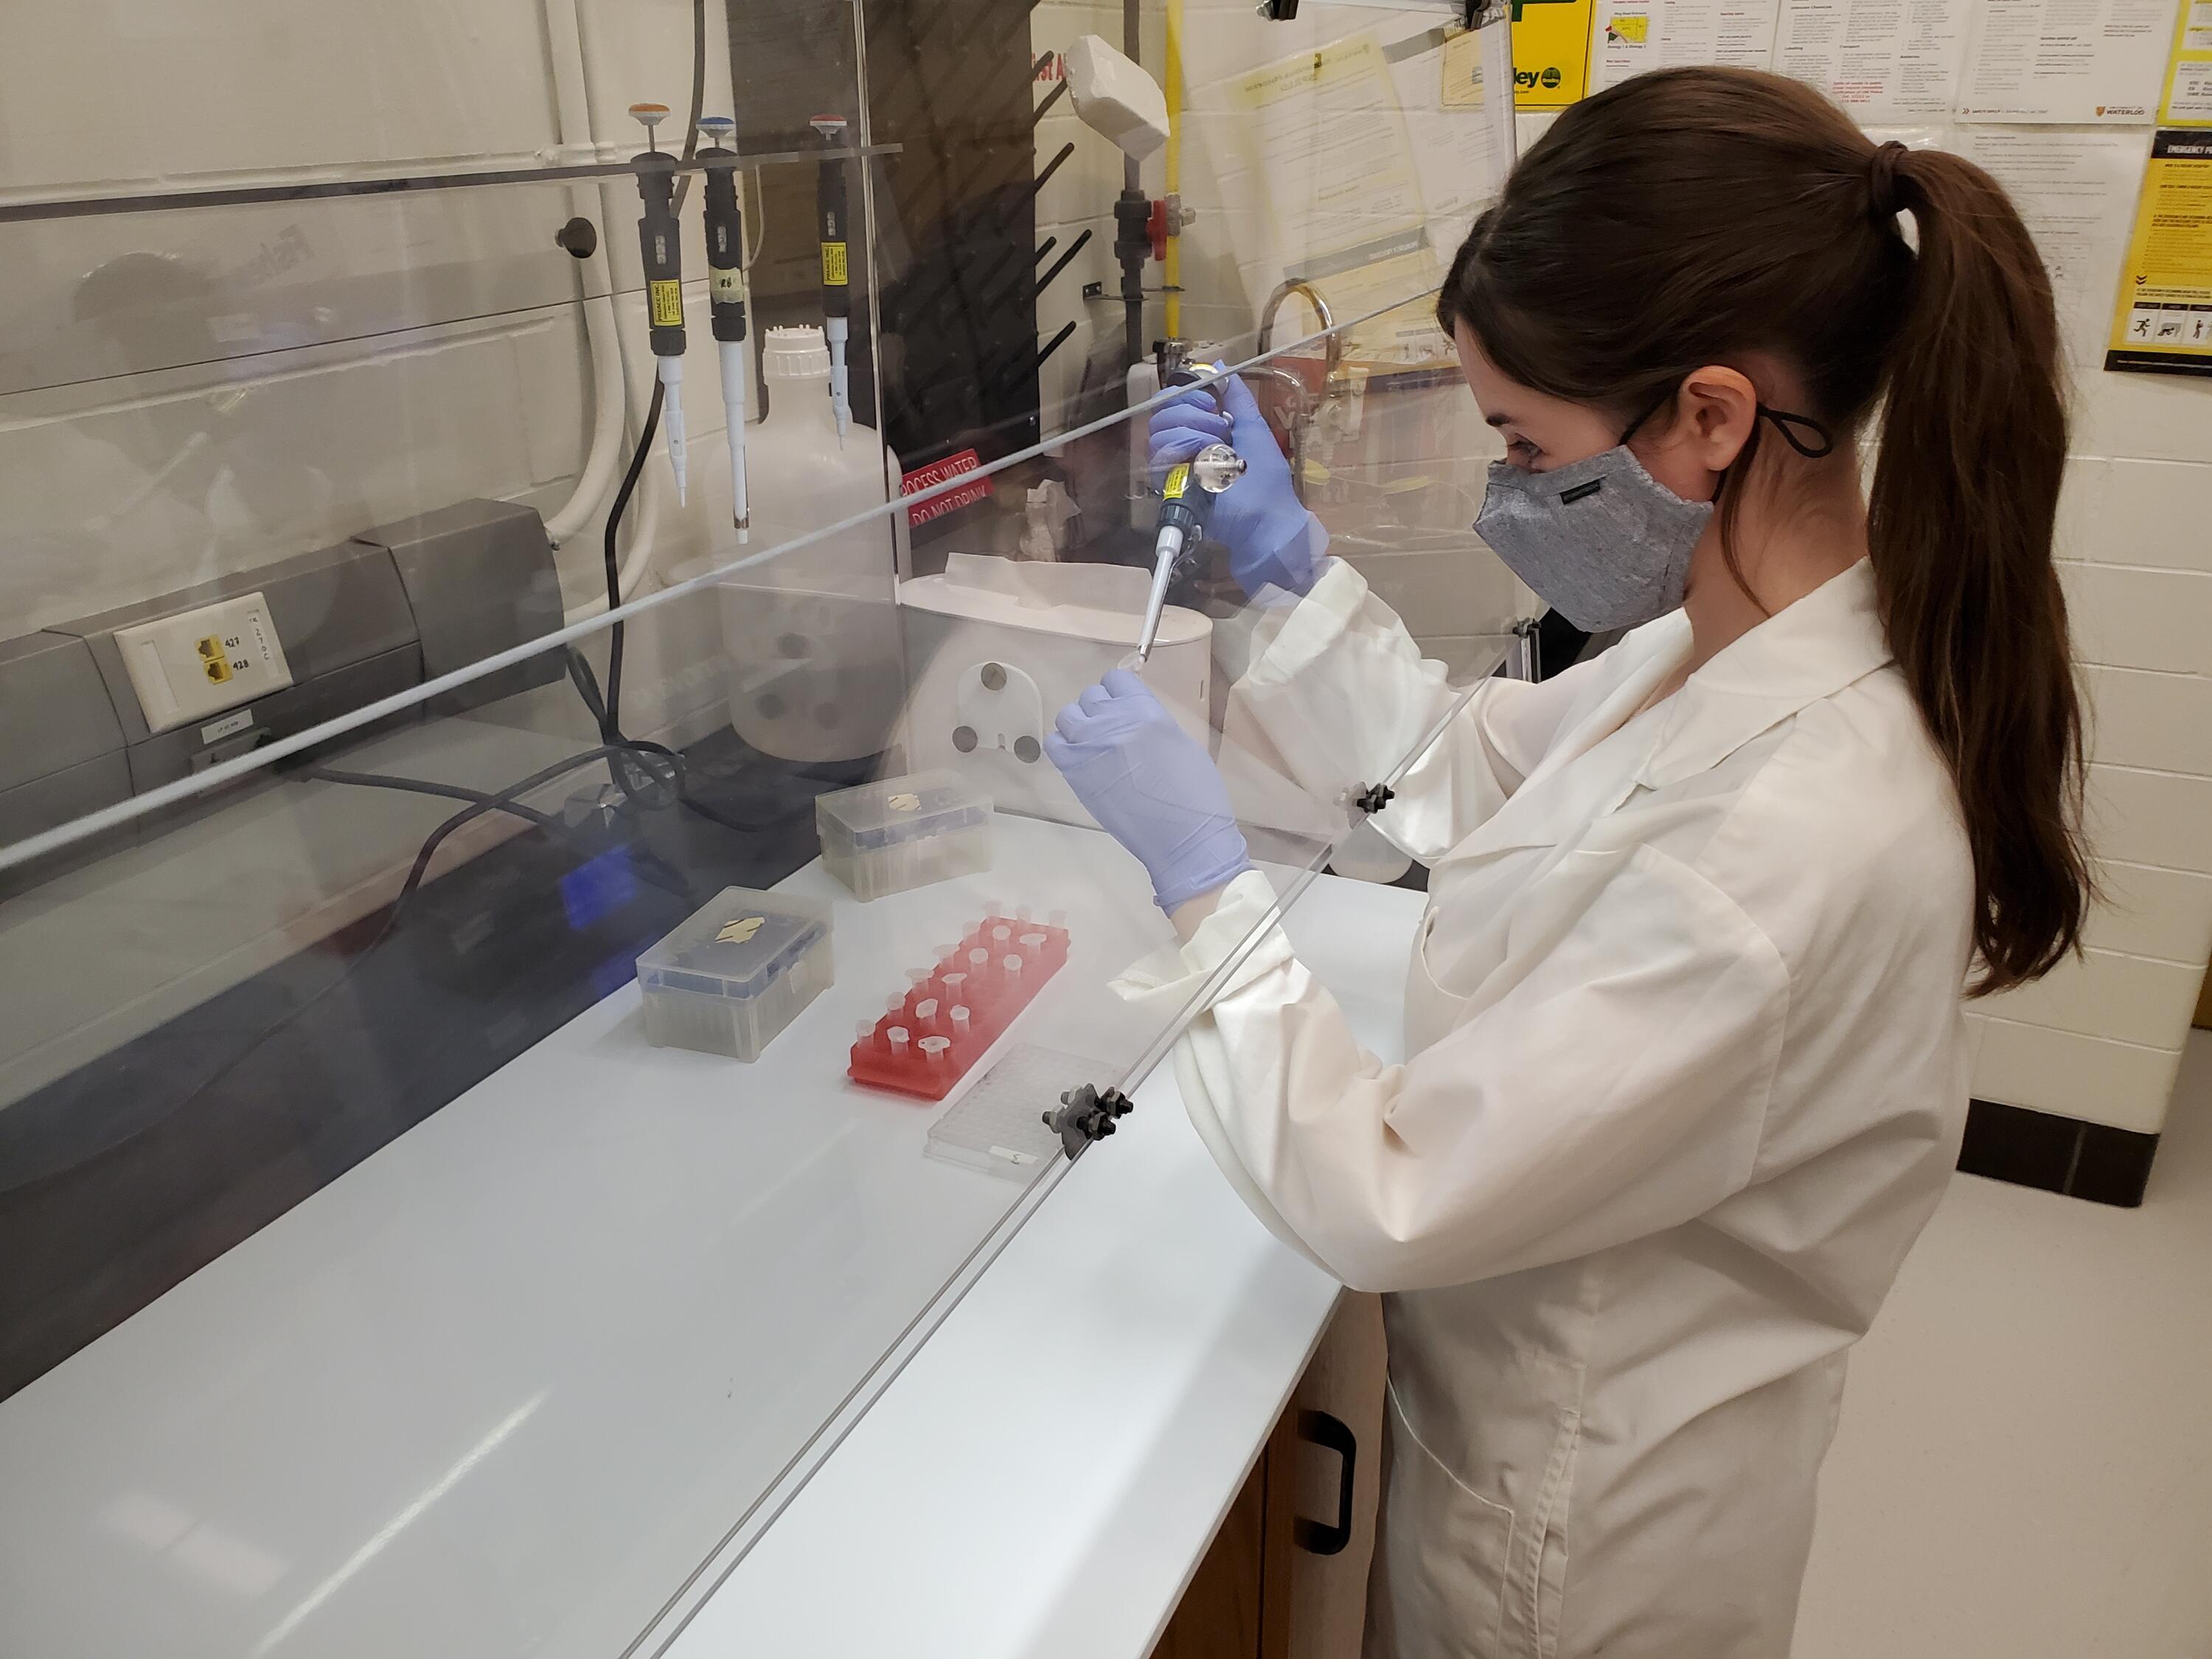 Rachel Beaver pipetting a sample in the lab